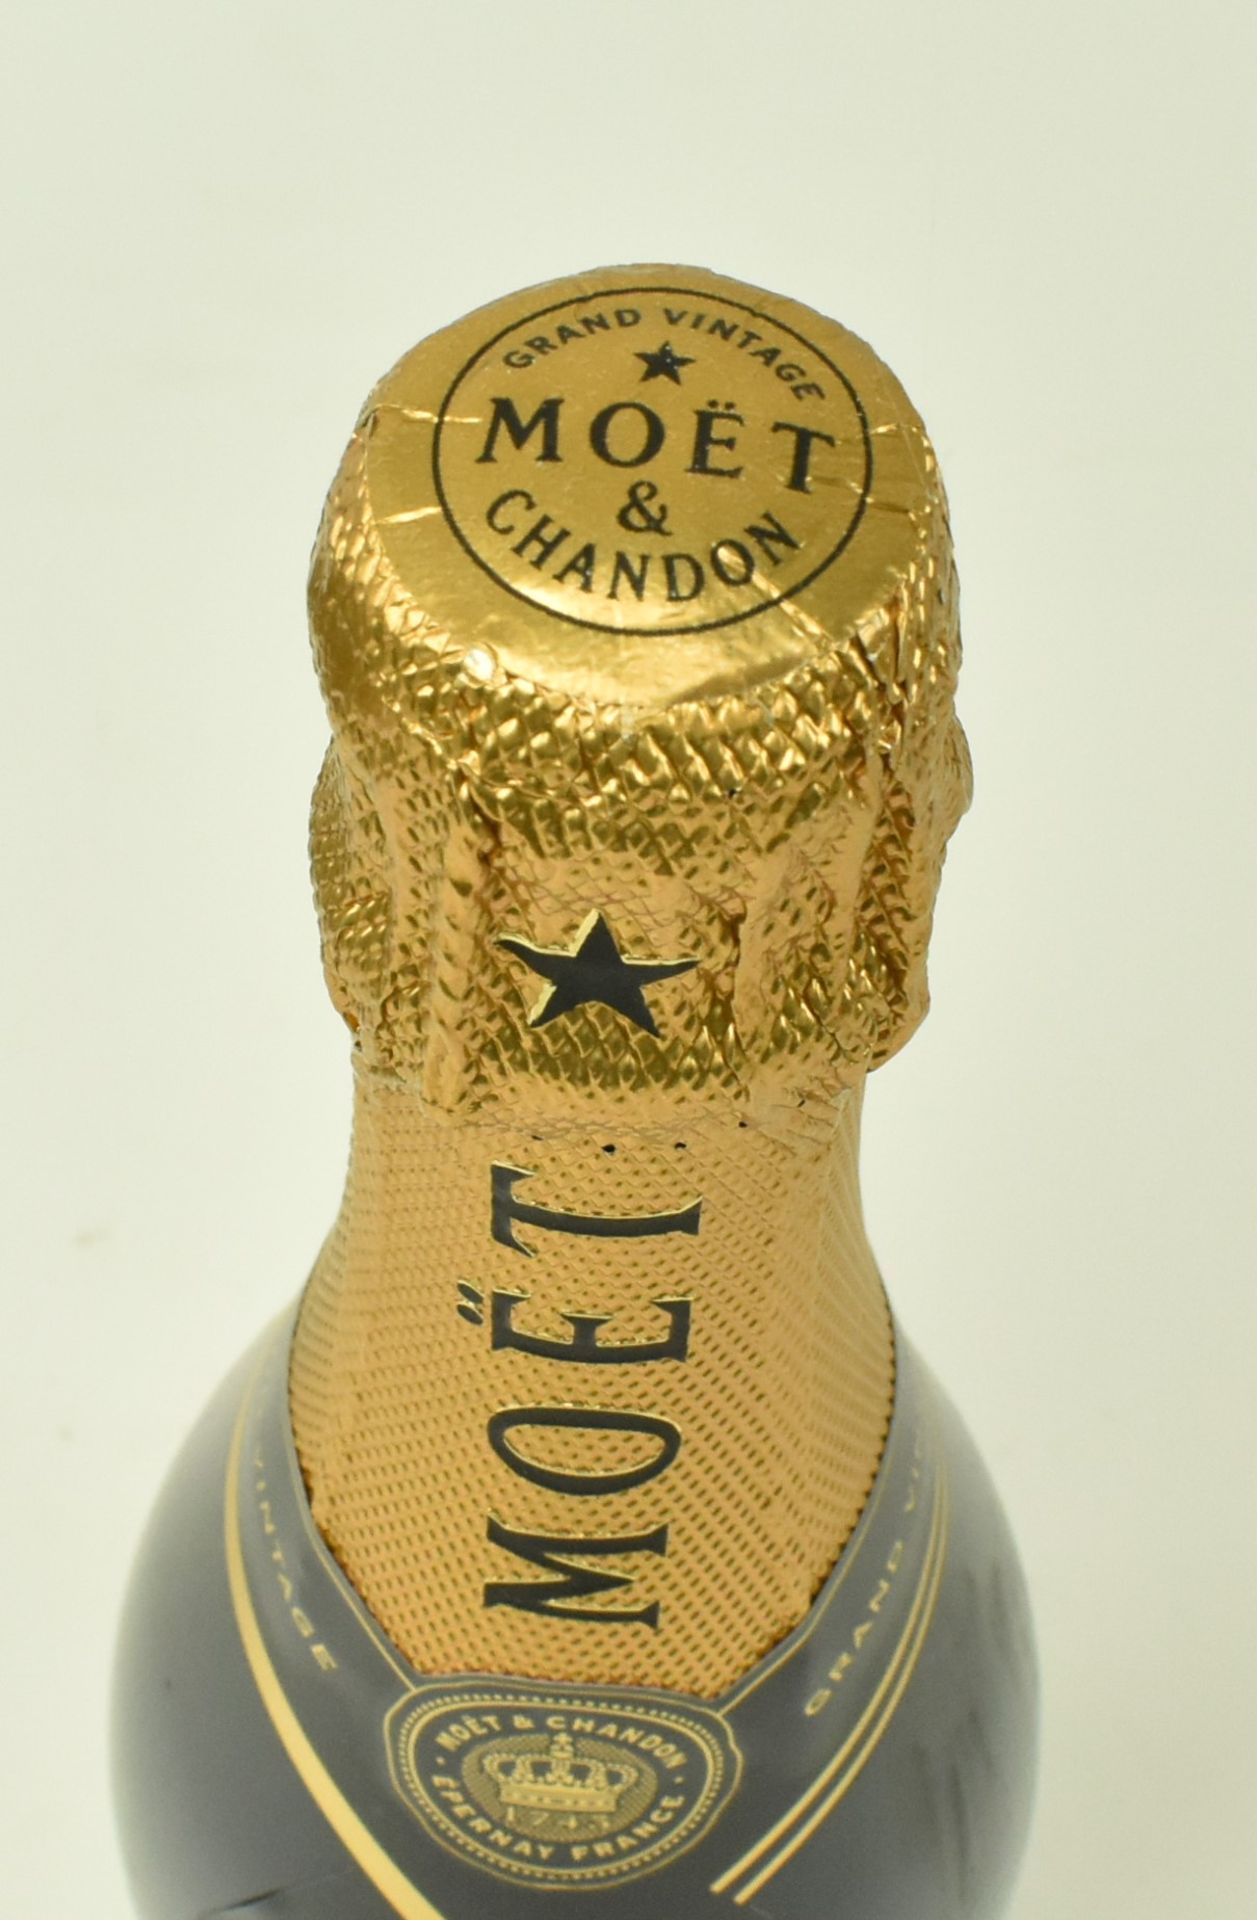 MOET & CHANDON CHAMPAGNE 2004 GRAND VINTAGE, BOXED - Image 3 of 9